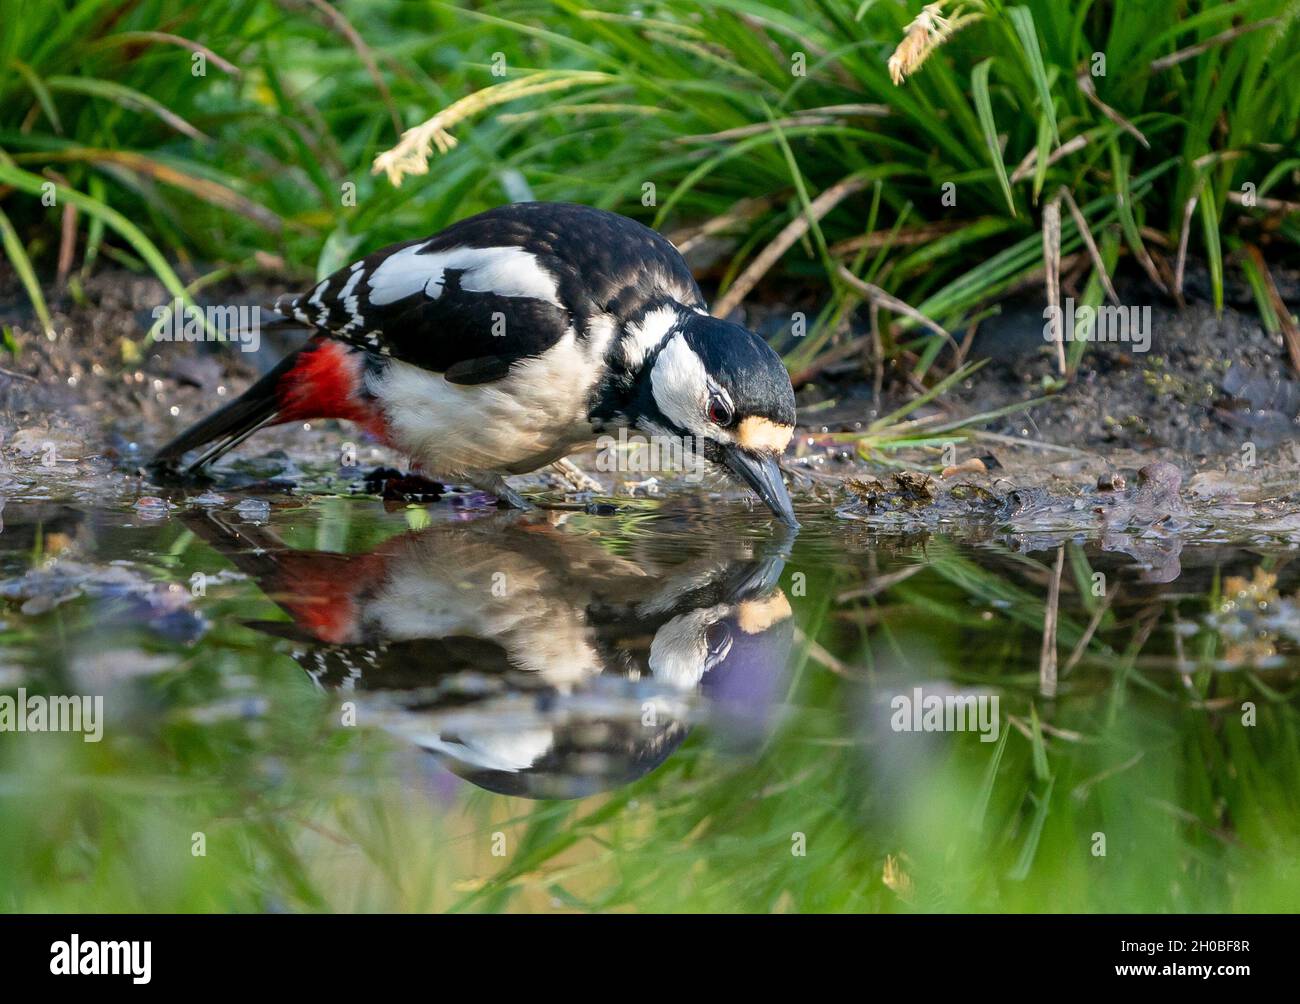 Great spotted woodpecker (Dendrocopos major) drinking water, England Stock Photo